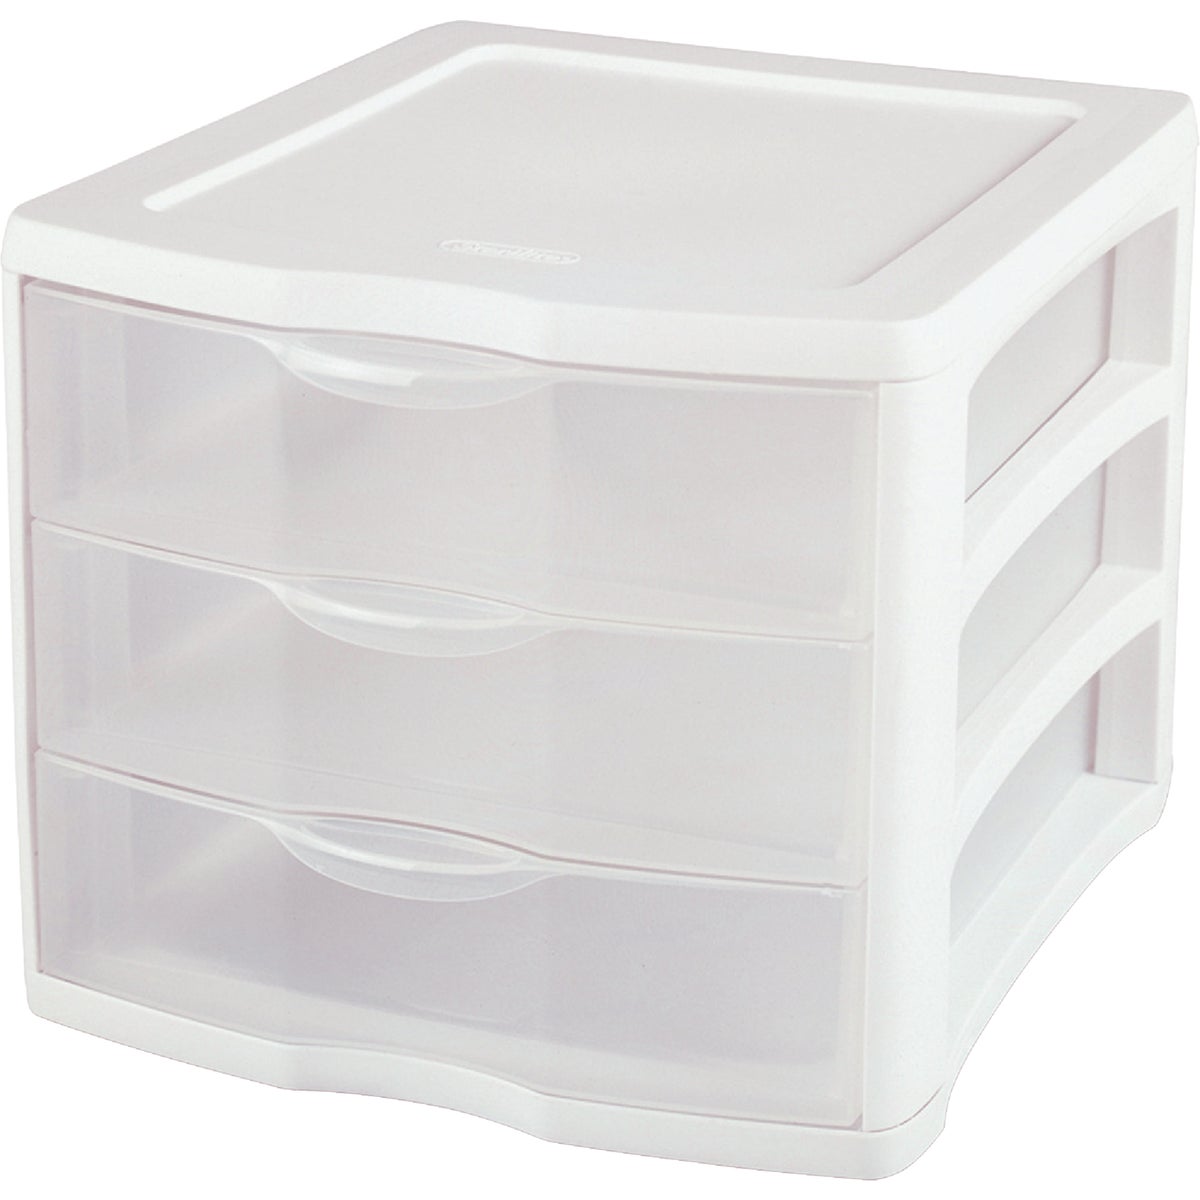 Sterilite ClearView 10 In. x 10 In. x 13.5 In. White 3-Drawer Storage Unit